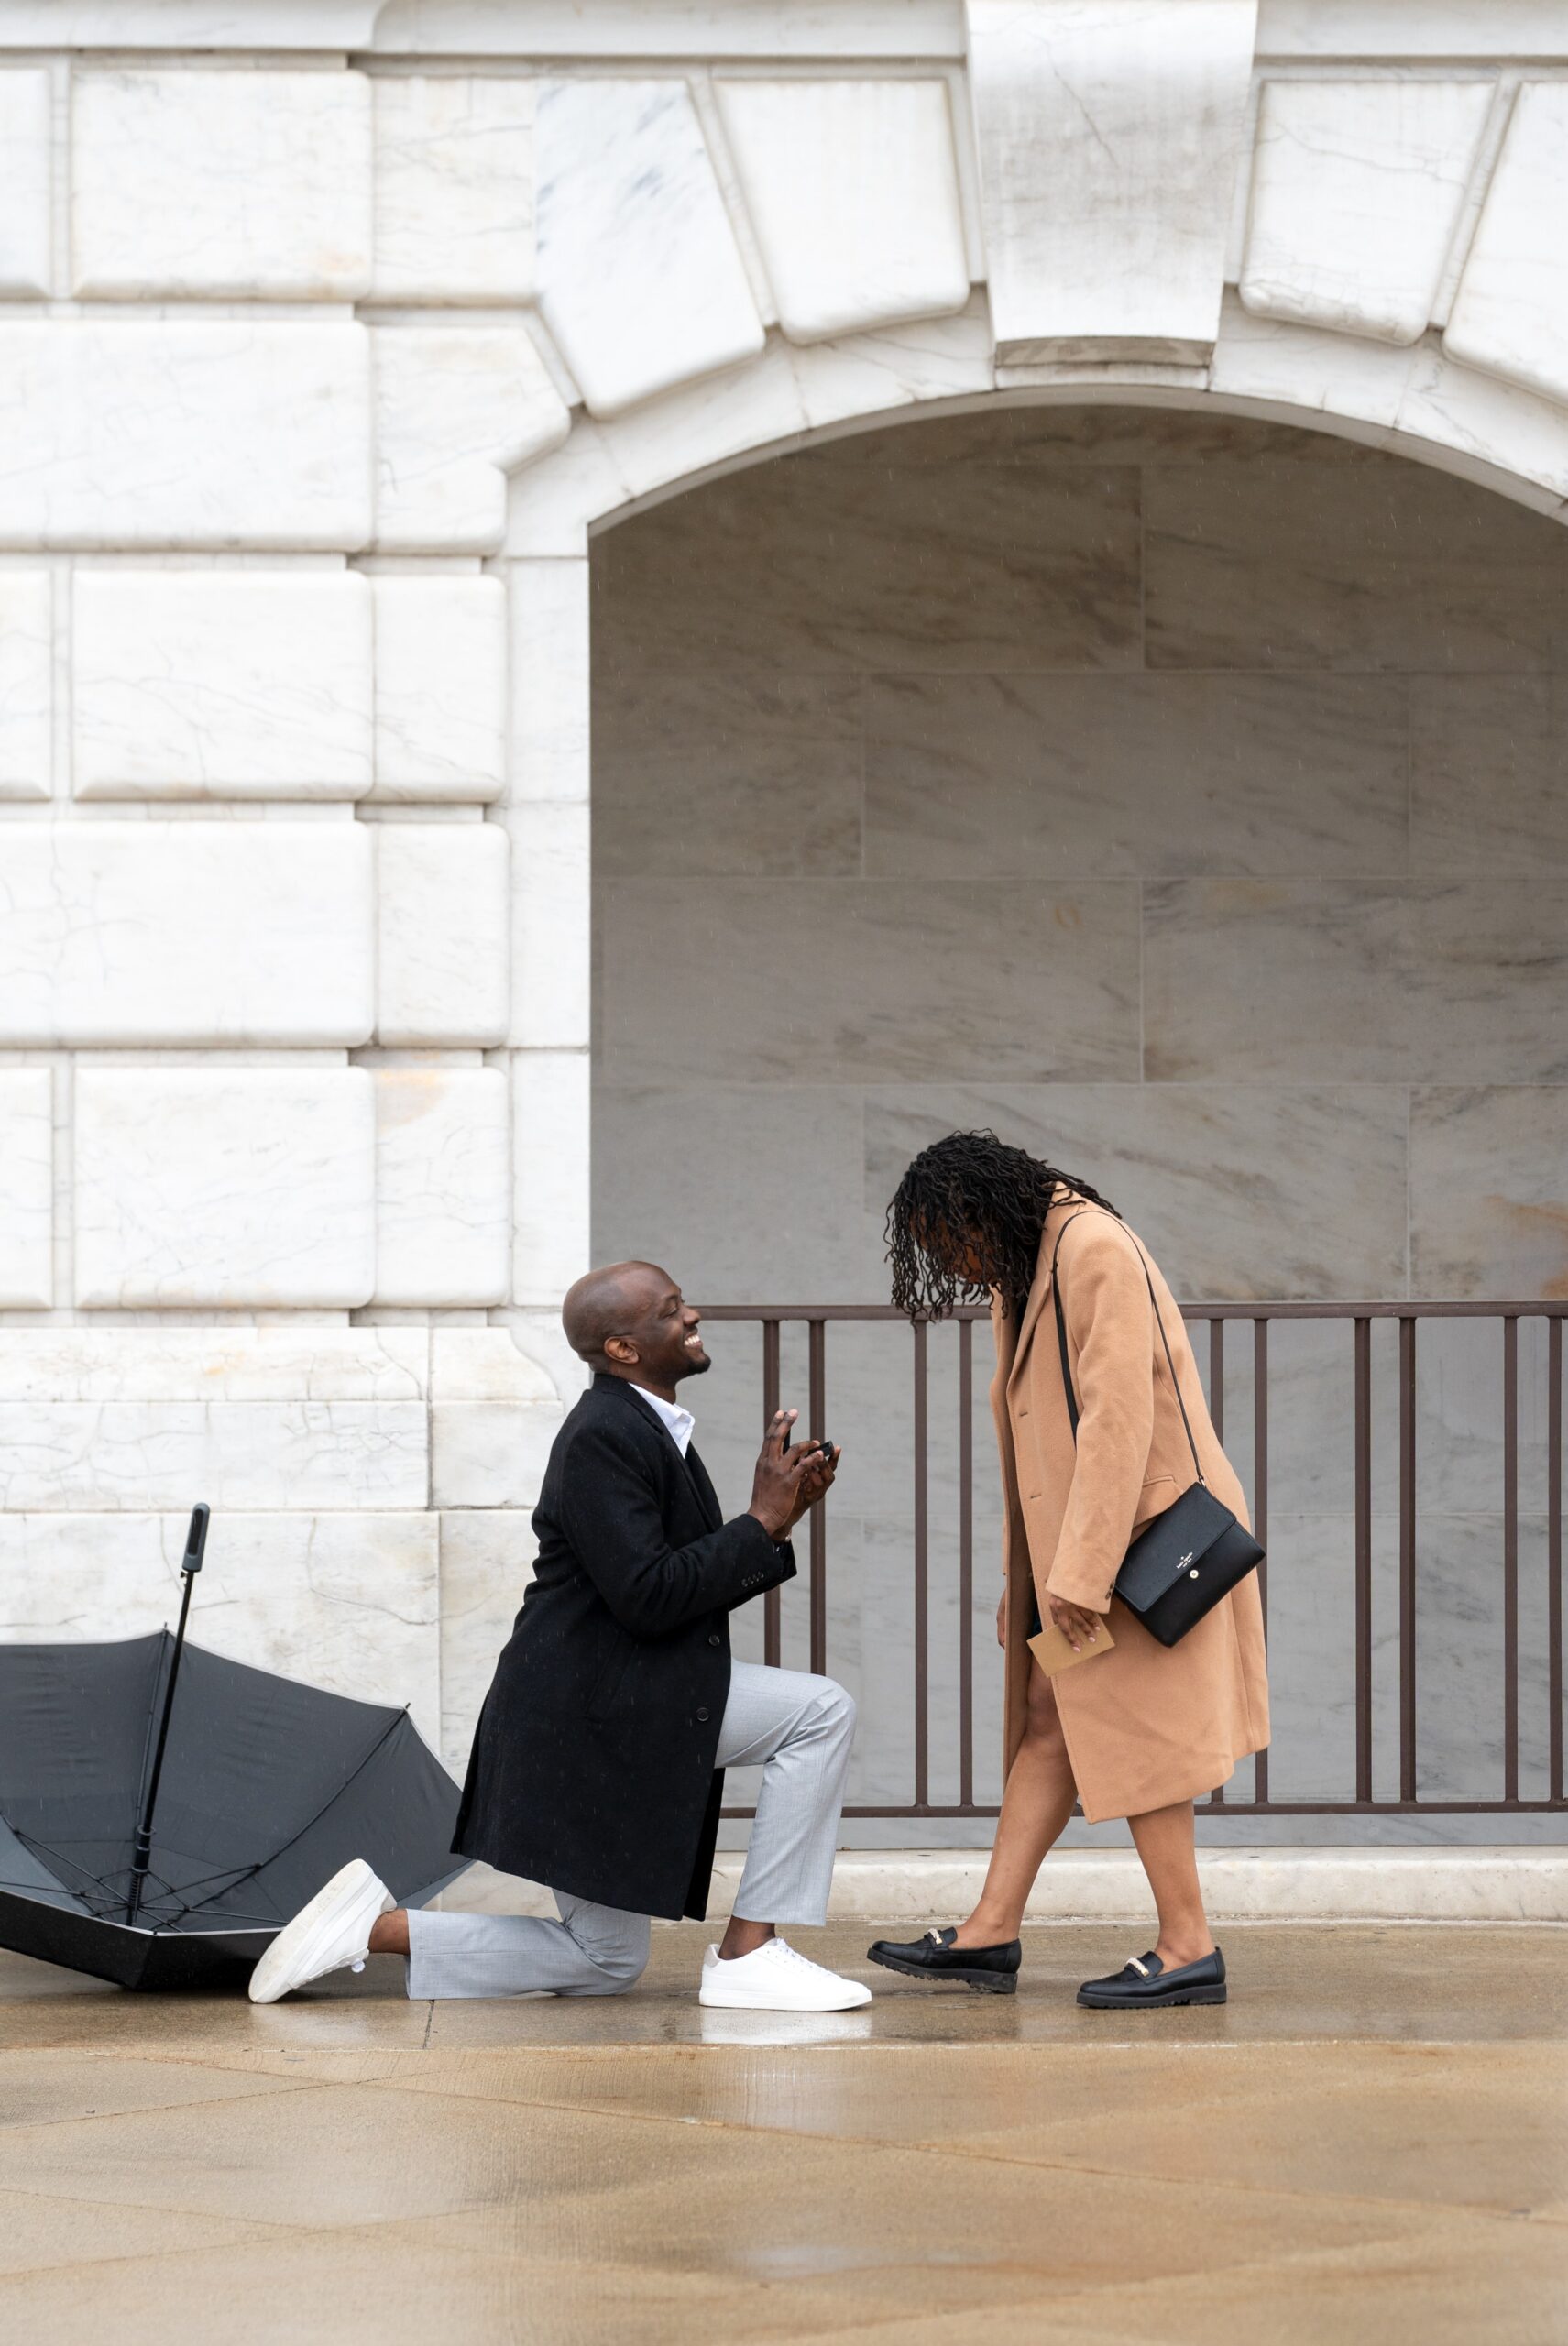 A gentleman takes a knee during his marriage proposal at the DIA in the rain.  